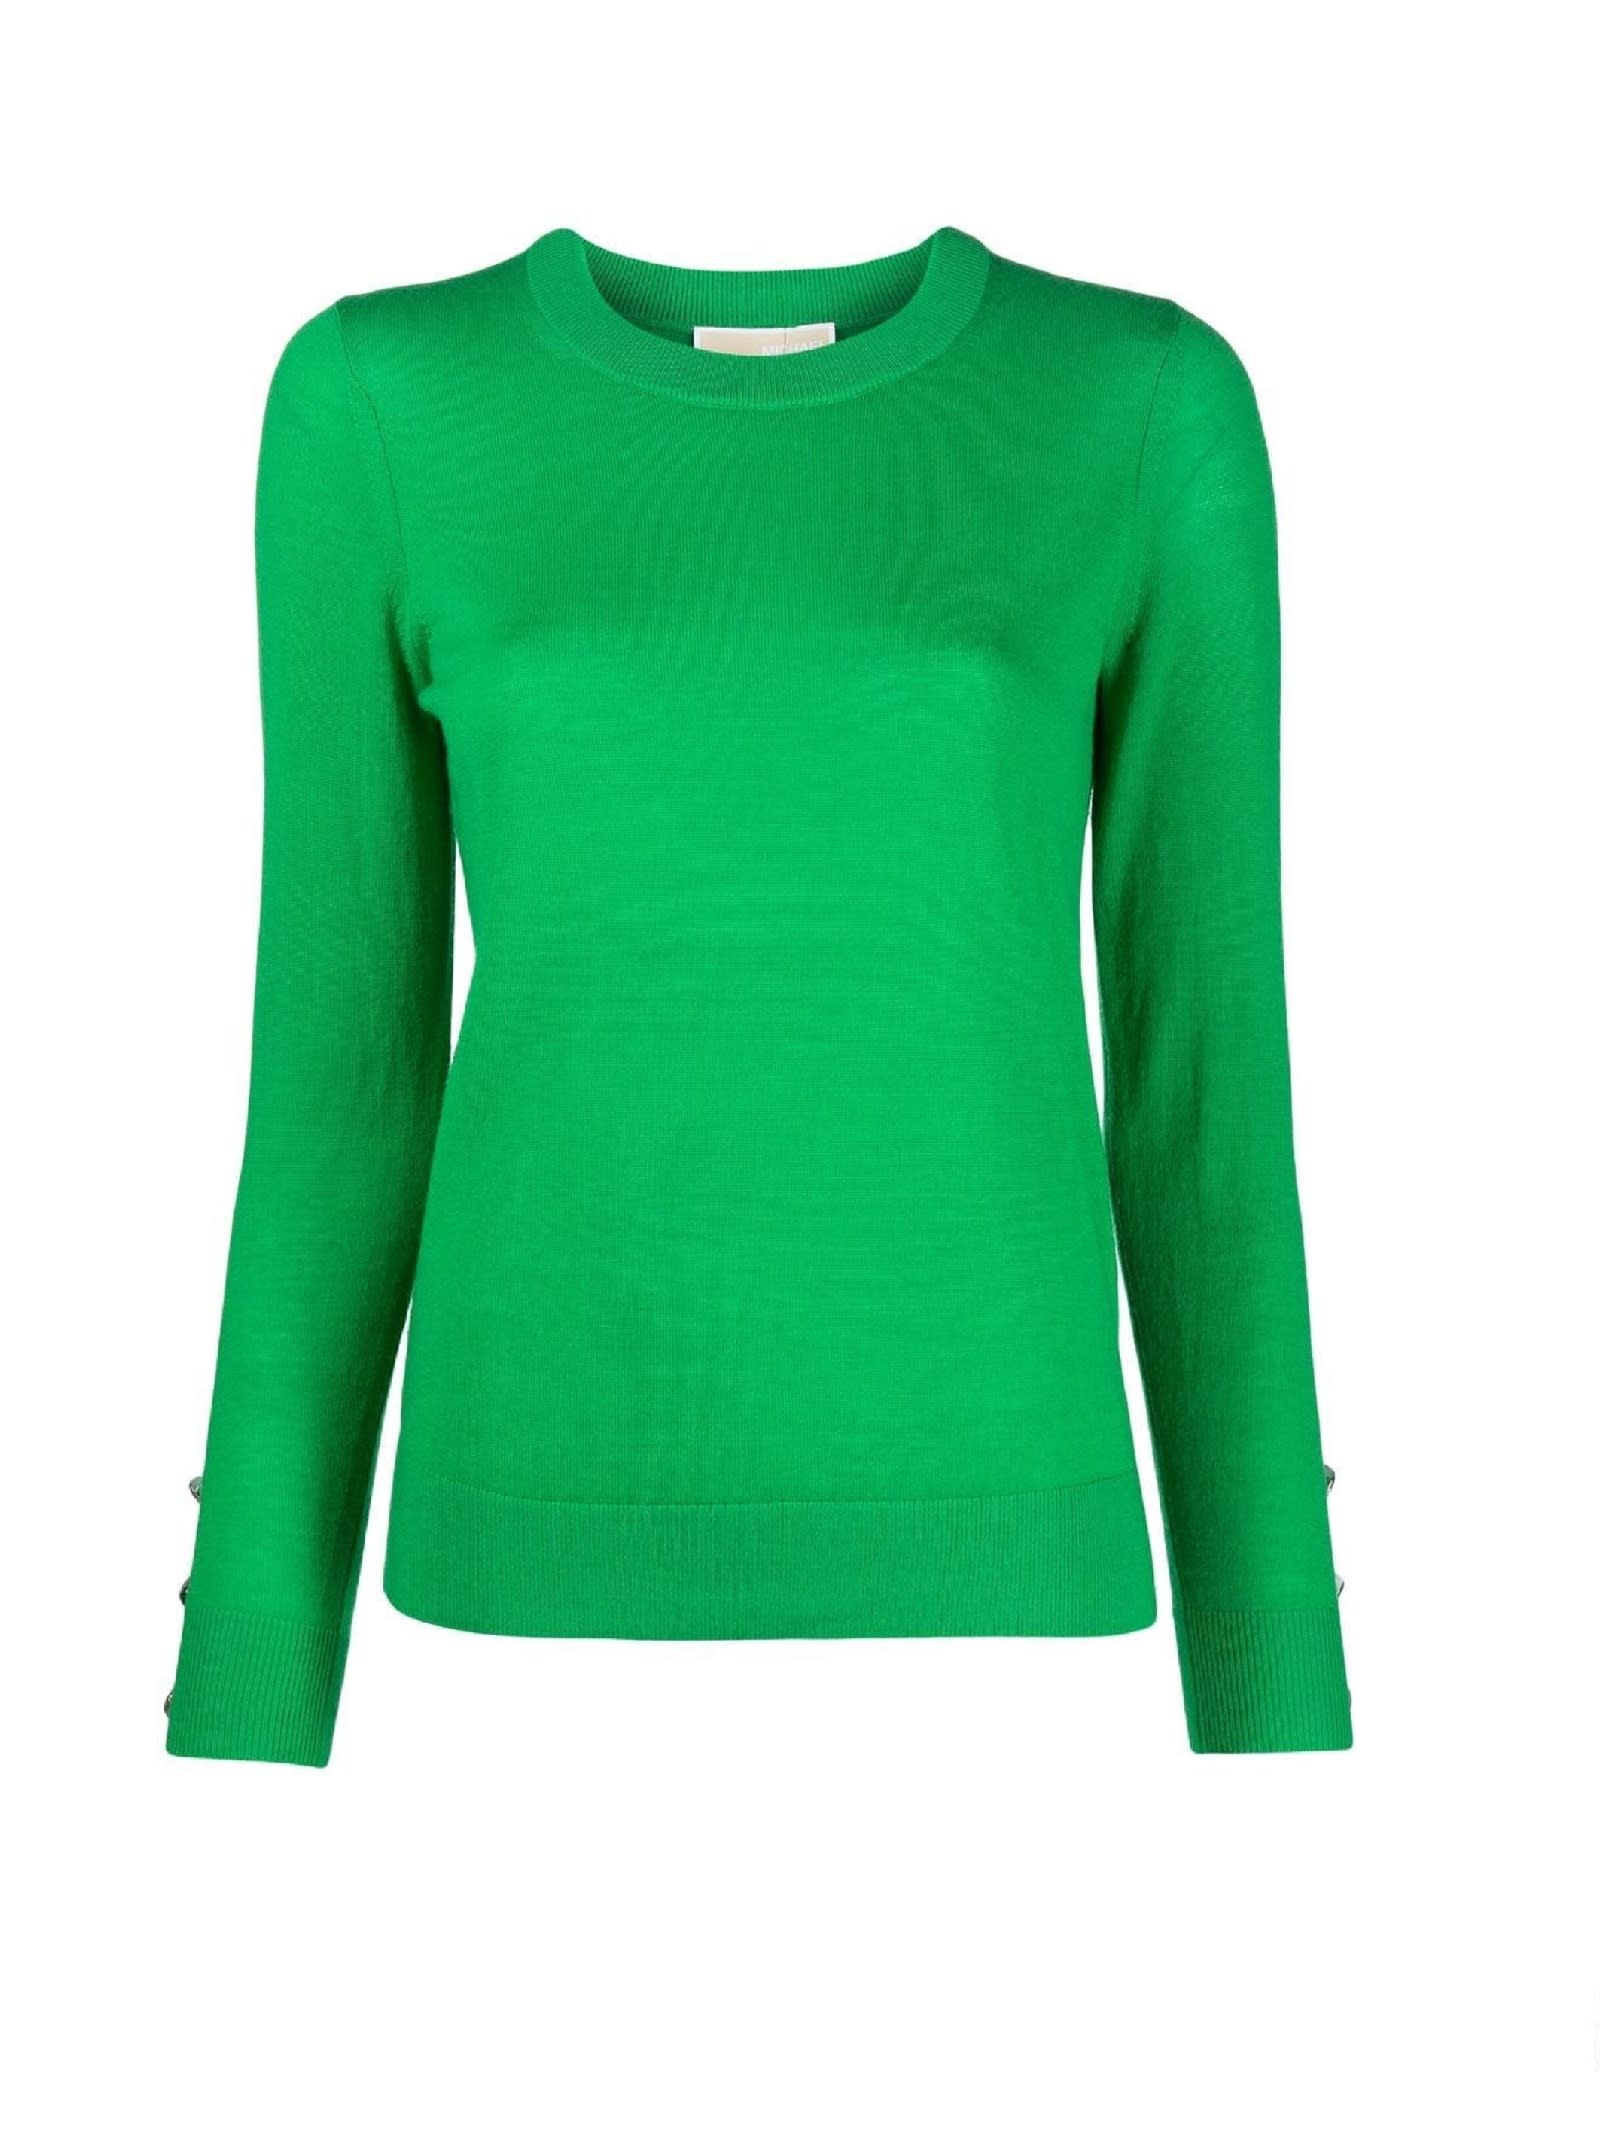 MICHAEL KORS GREEN ROUND NECK PULL-OVER WITH BRANDED BUTTONS ON CUFFS IN WOOL WOMAN